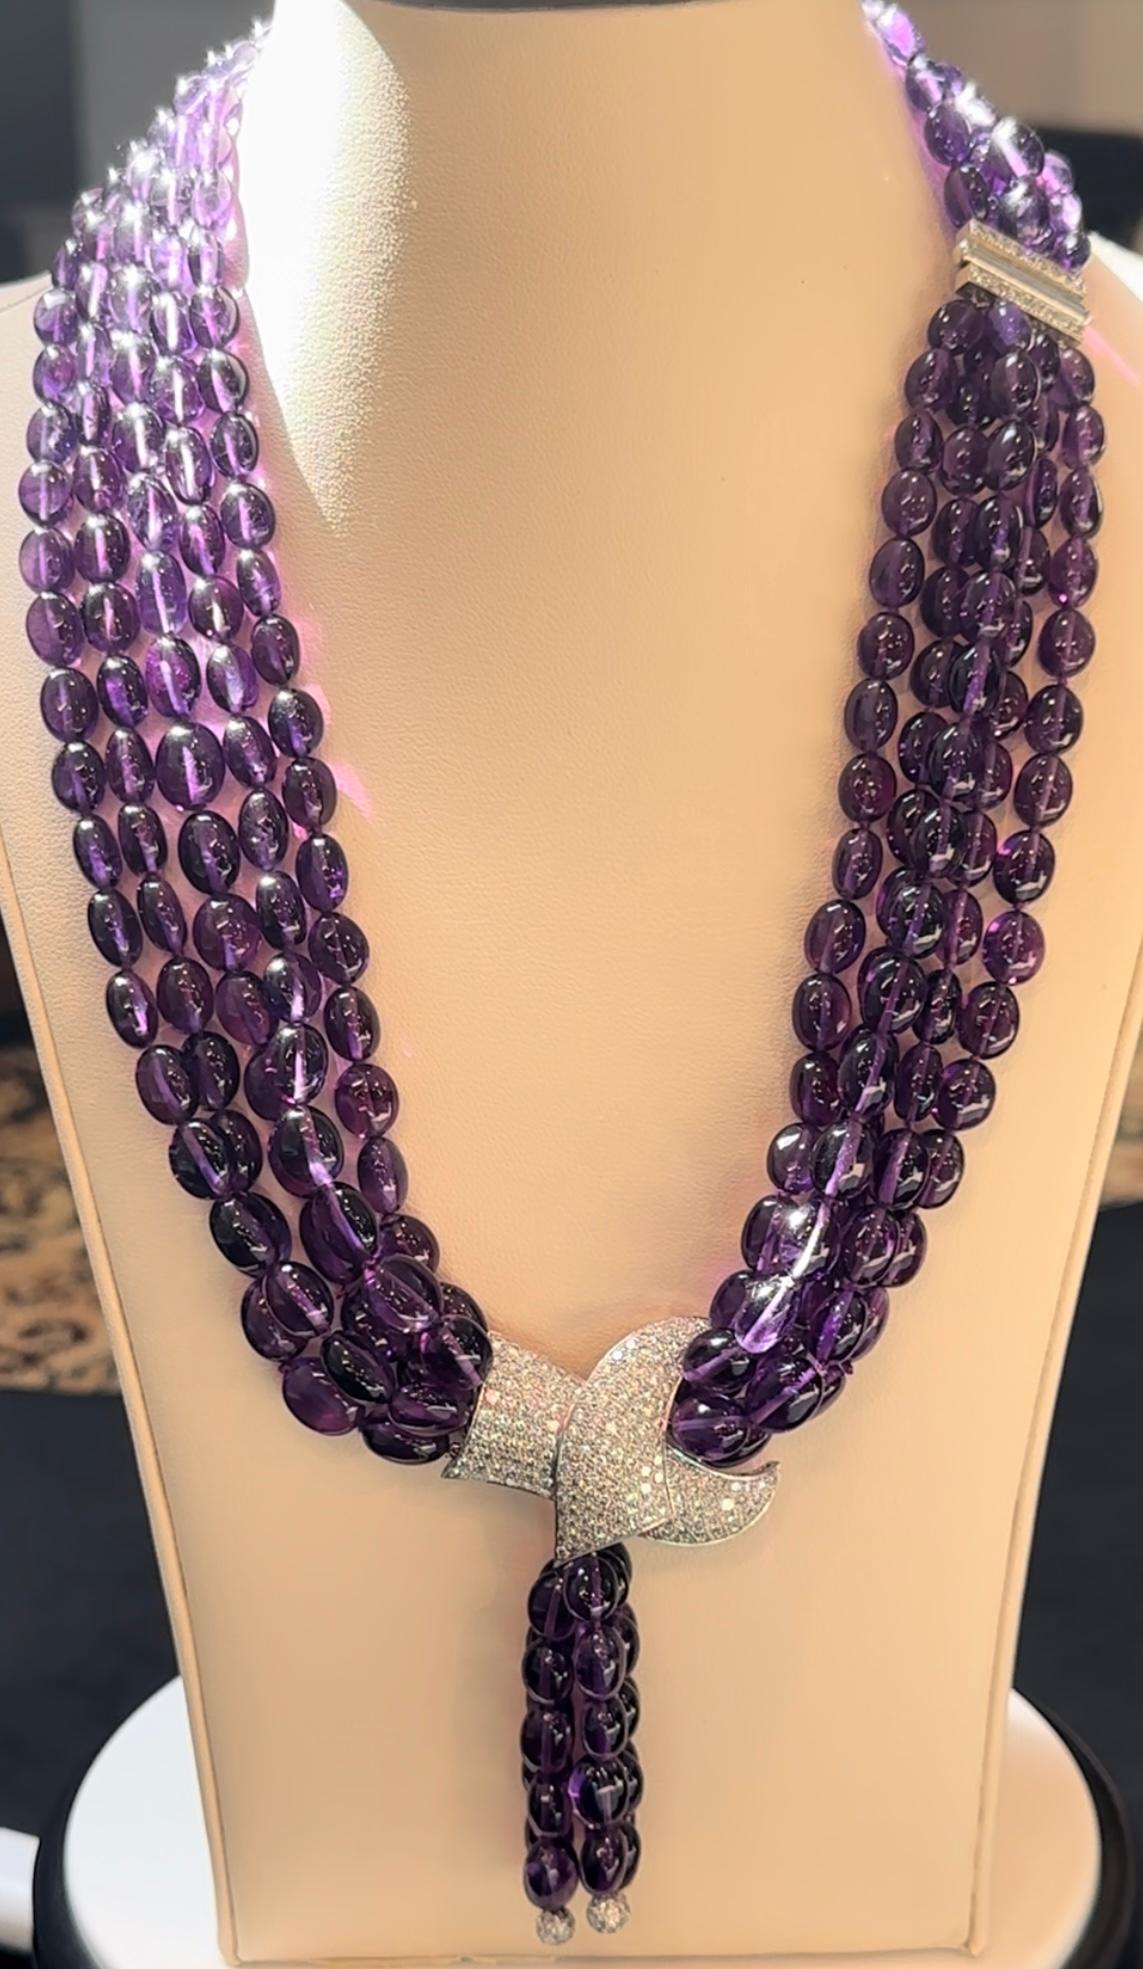 700 Ct Natural Amethyst Multi Layer Bead Necklace in Platinum with 9 Ct Diamonds For Sale 12